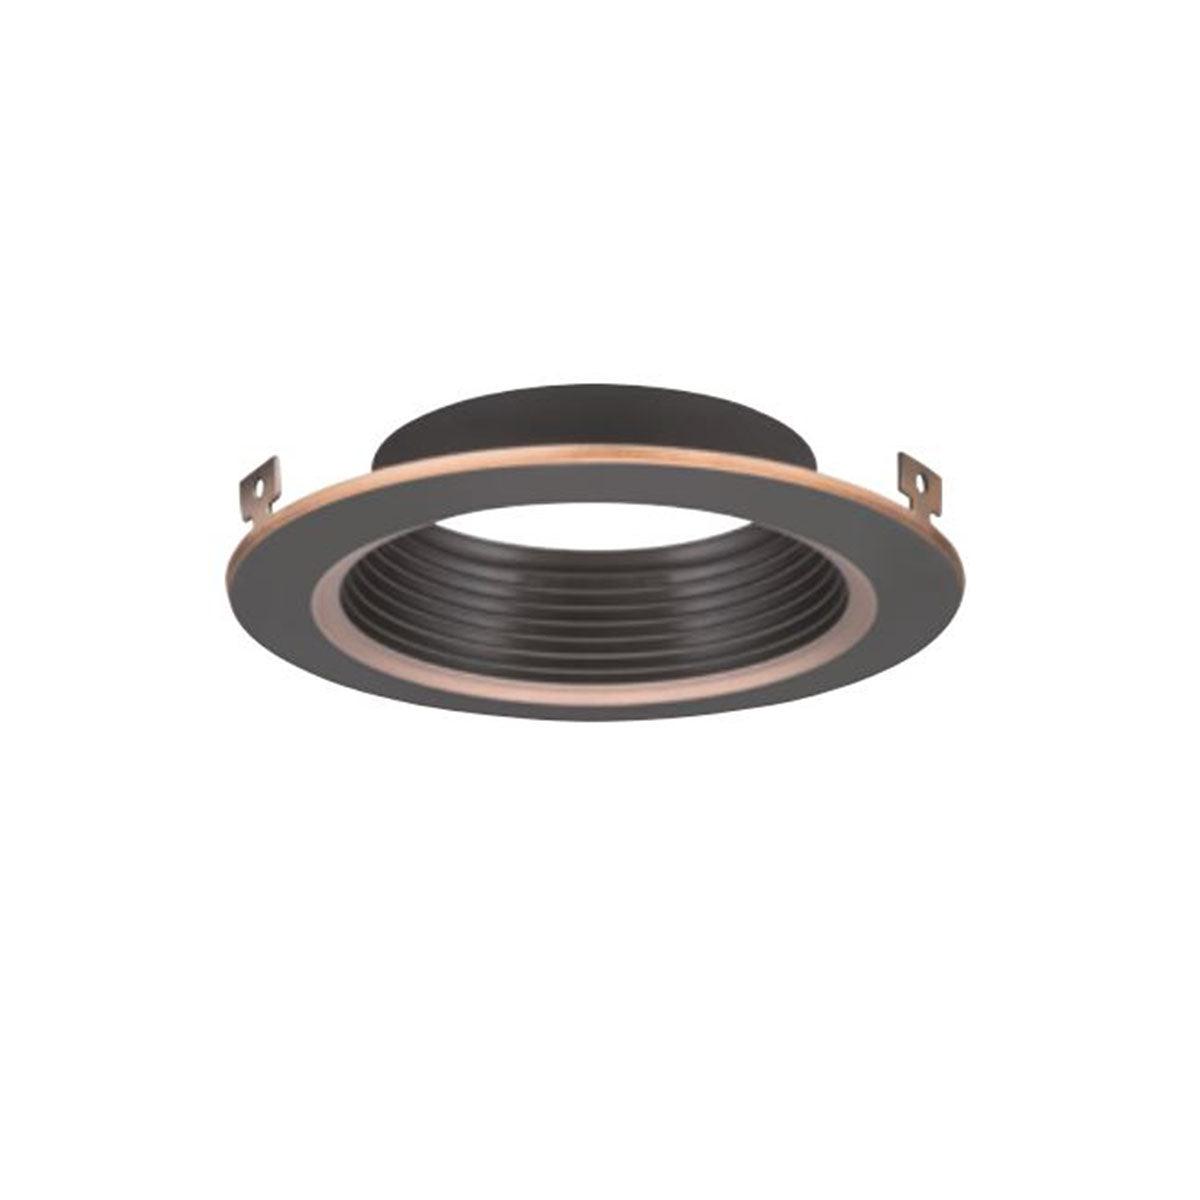 5/6" Round Baffle Trim Oil Rubbed Bronze Finish - Bees Lighting